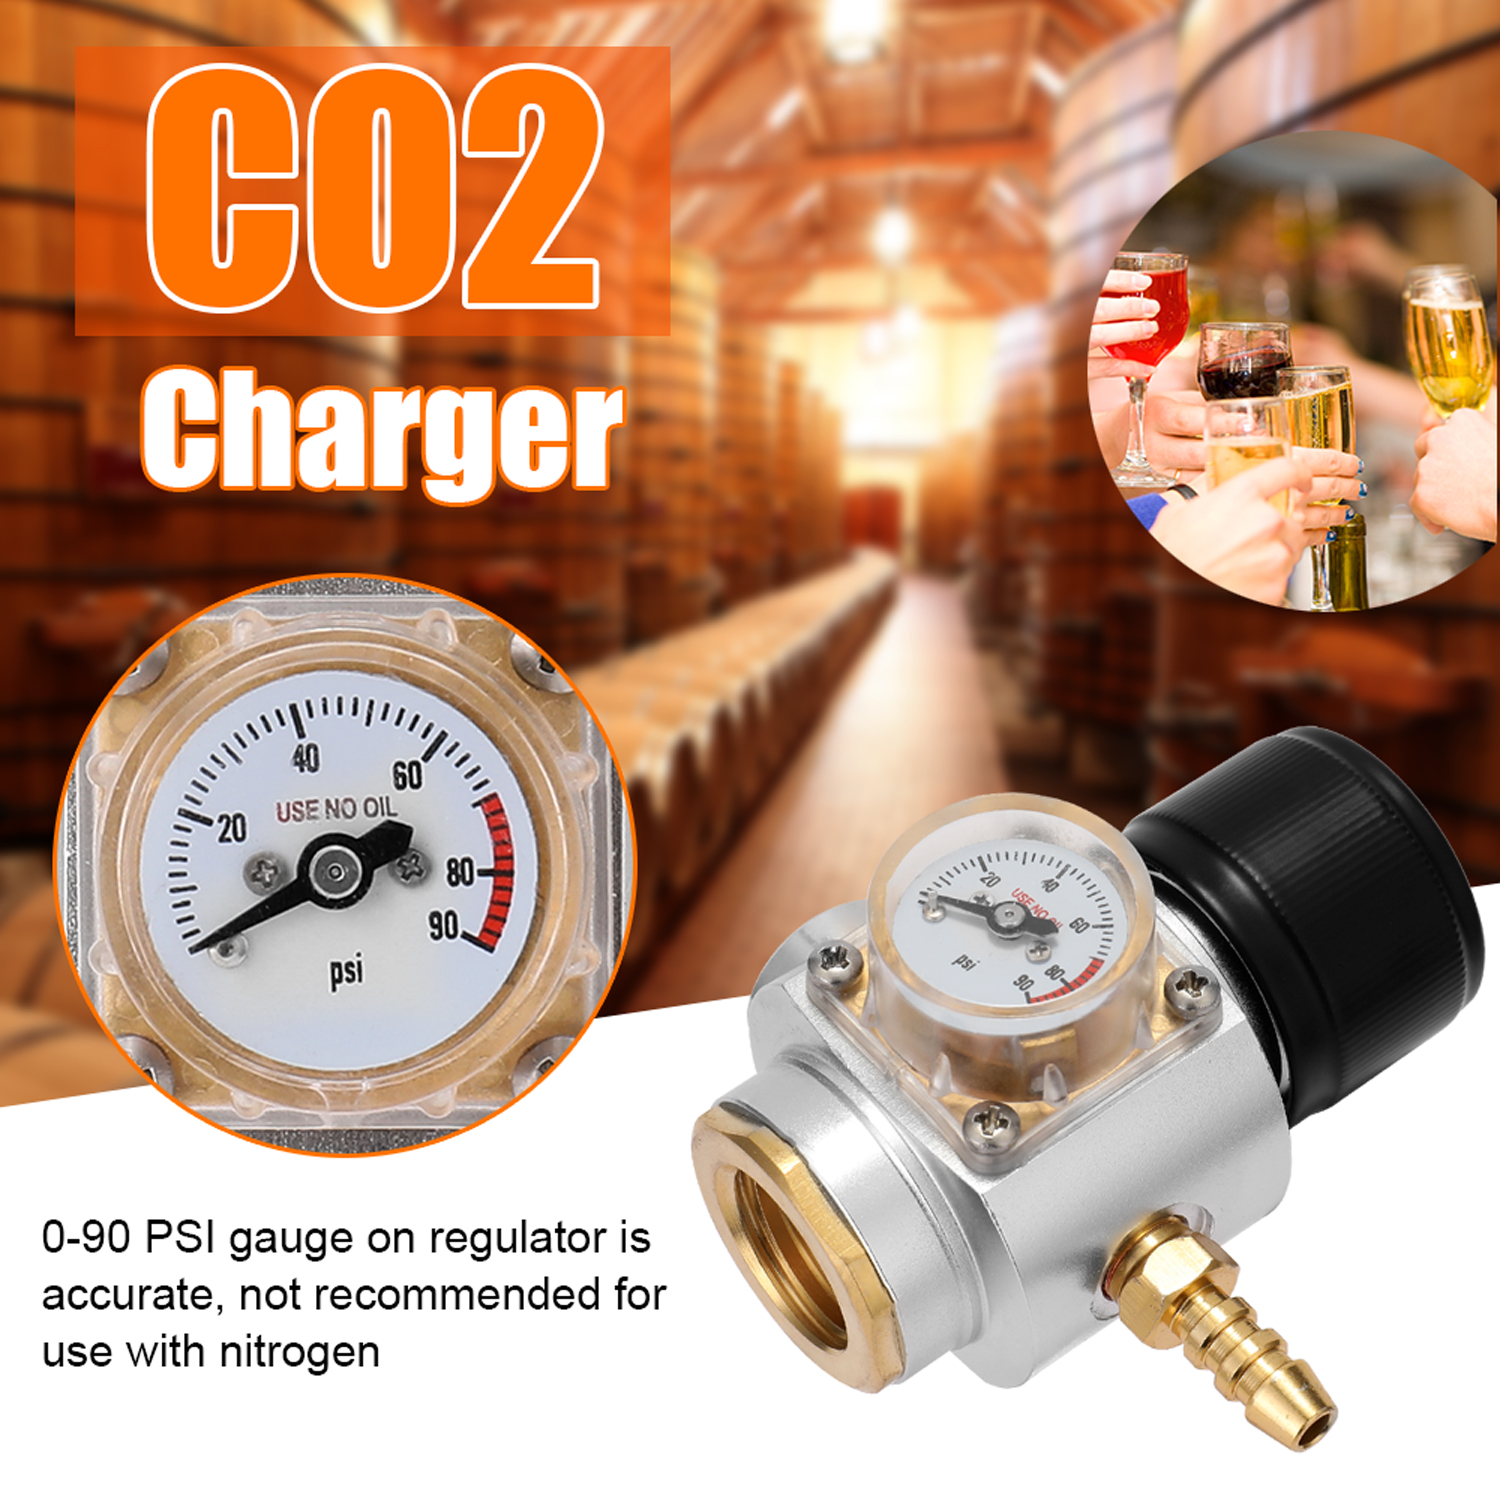 CO2 Charger Sodastream CO2 Mini Gas Charger 0-90 PSI Gauge for Soda Water Beer Kegerator